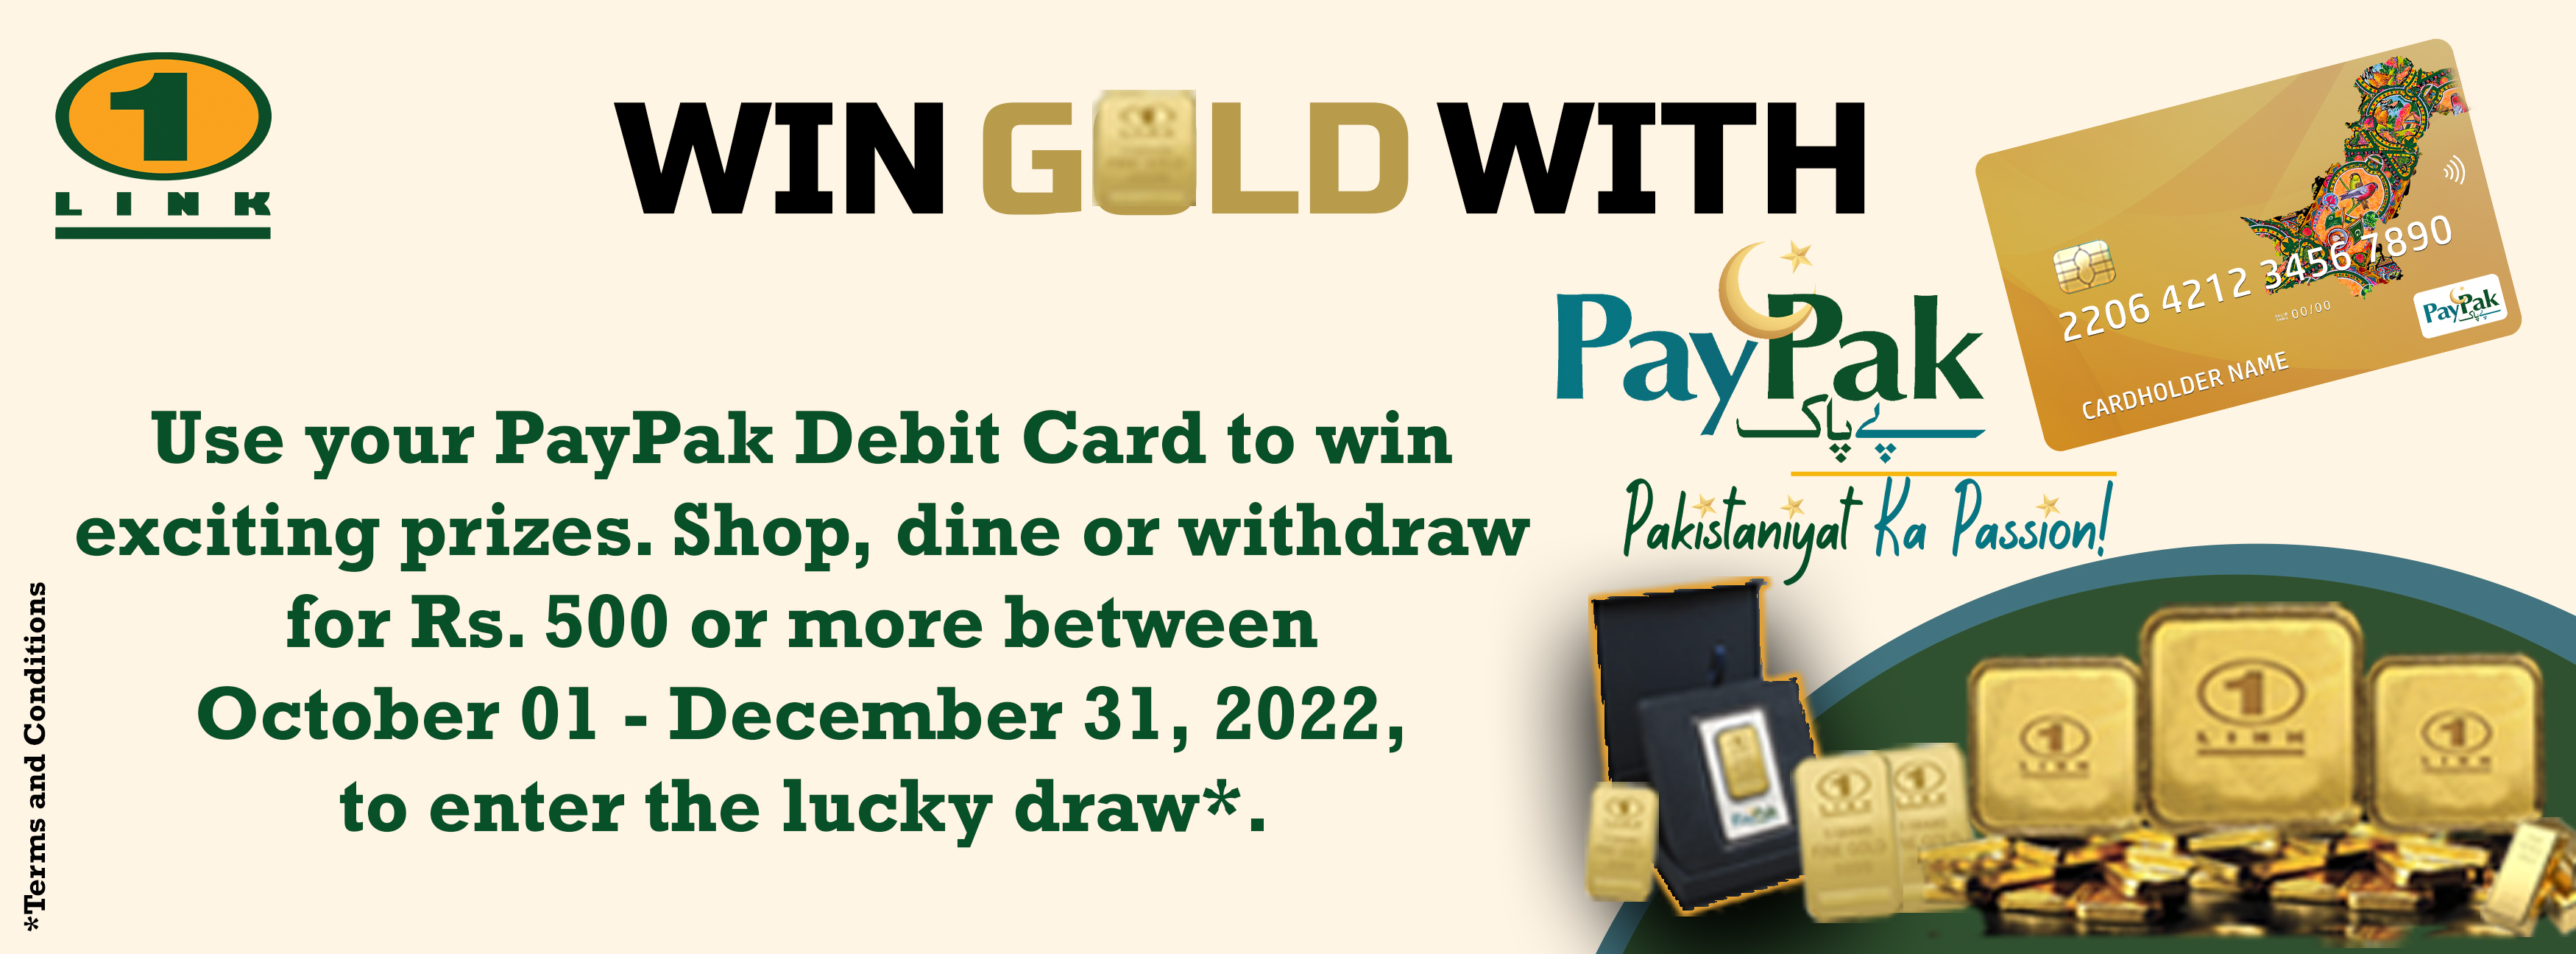 Win Gold with PayPak QIV, 2022